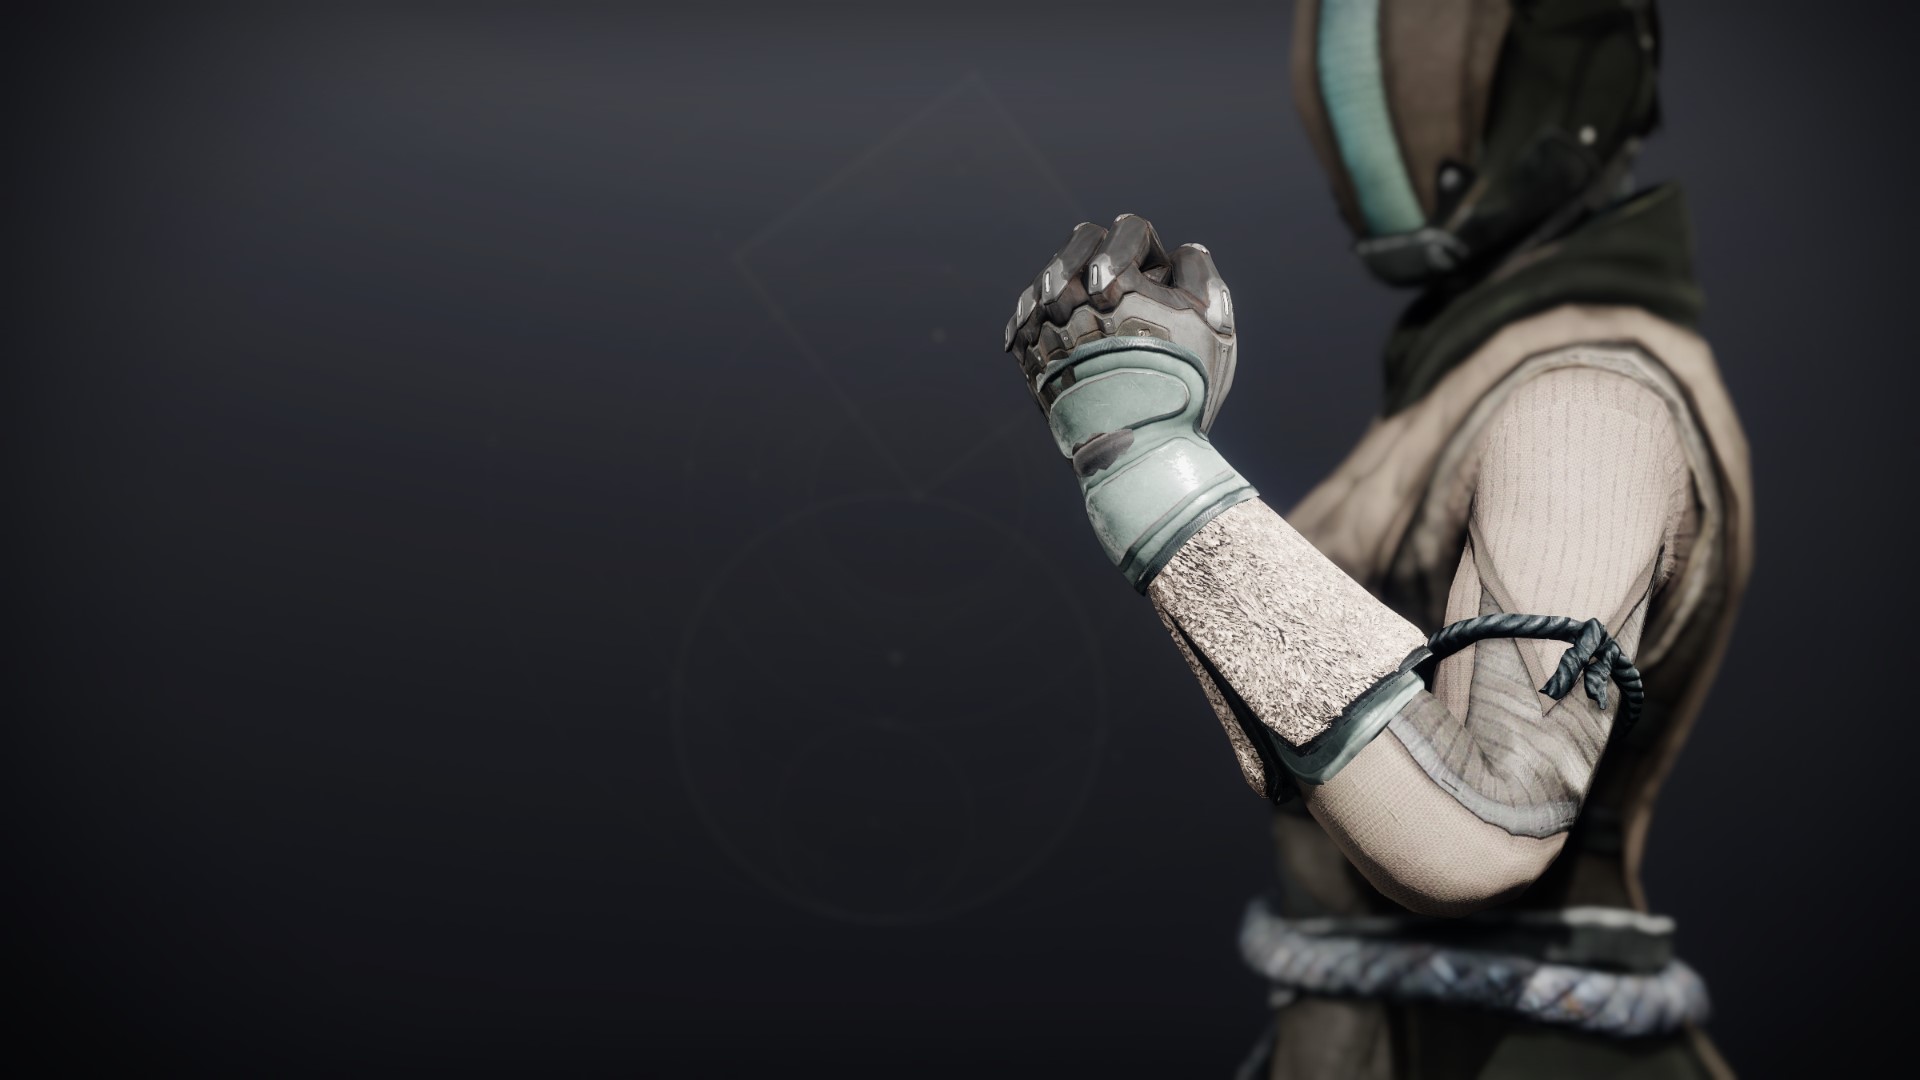 An in-game render of the Crystocrene Gloves.